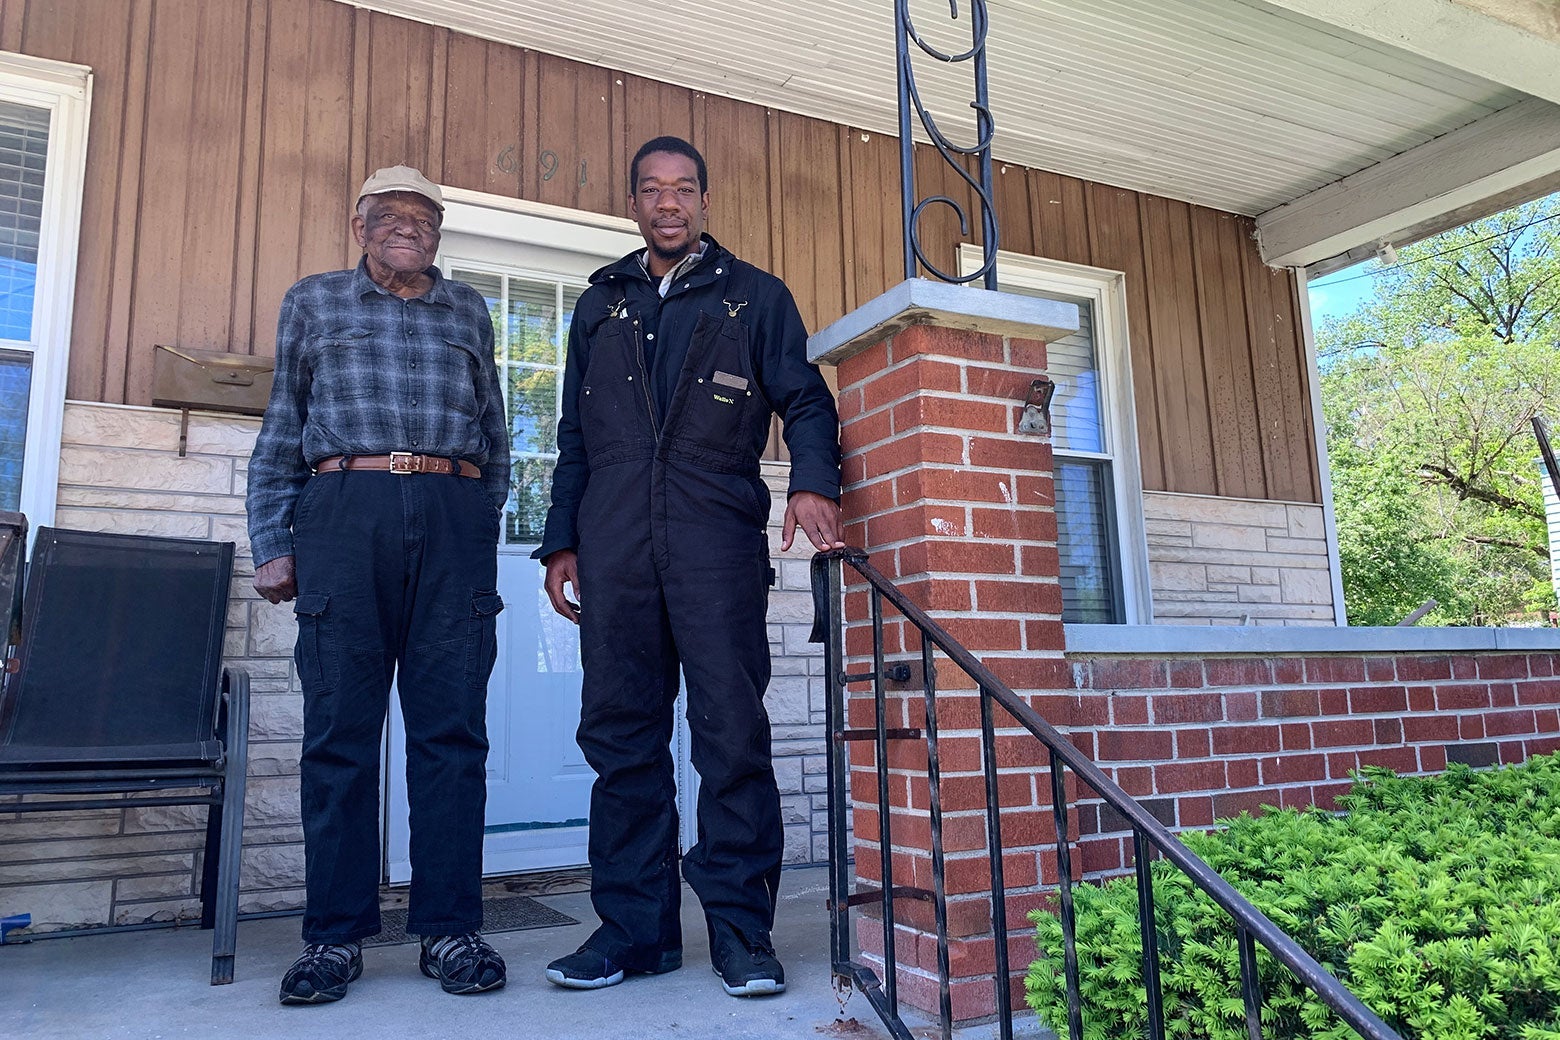 An elderly Black man in a plaid shirt and baseball cap and a younger Black man in Black overalls stand on a brick porch in front of a house.